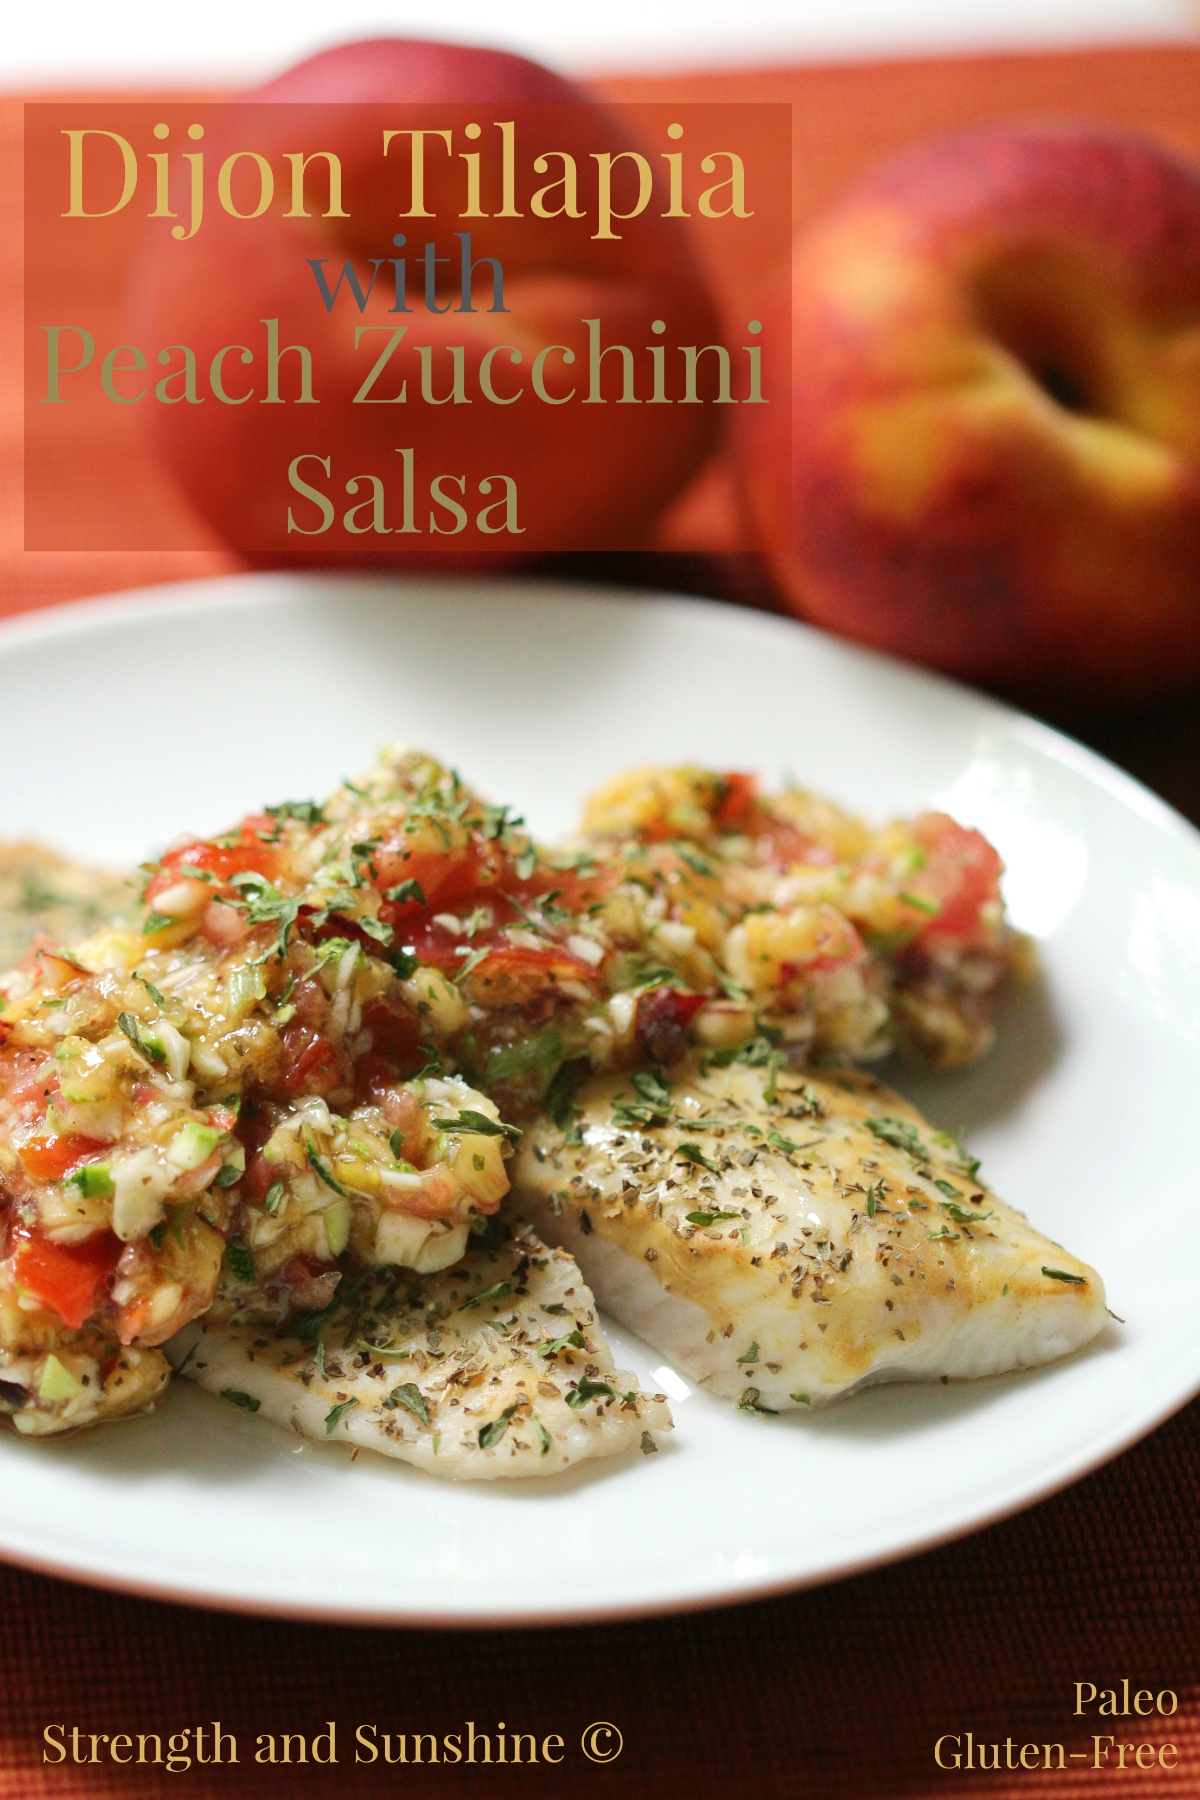 Dijon Tilapia with Peach Zucchini Salsa | Strength and Sunshine @RebeccaGF666 The subtle flavors of Dijon and basil on light tilapia, paired with a vibrant sweet but savory fresh peach zucchini salsa. A healthy, palate-pleasing gluten-free and paleo dinner entree.